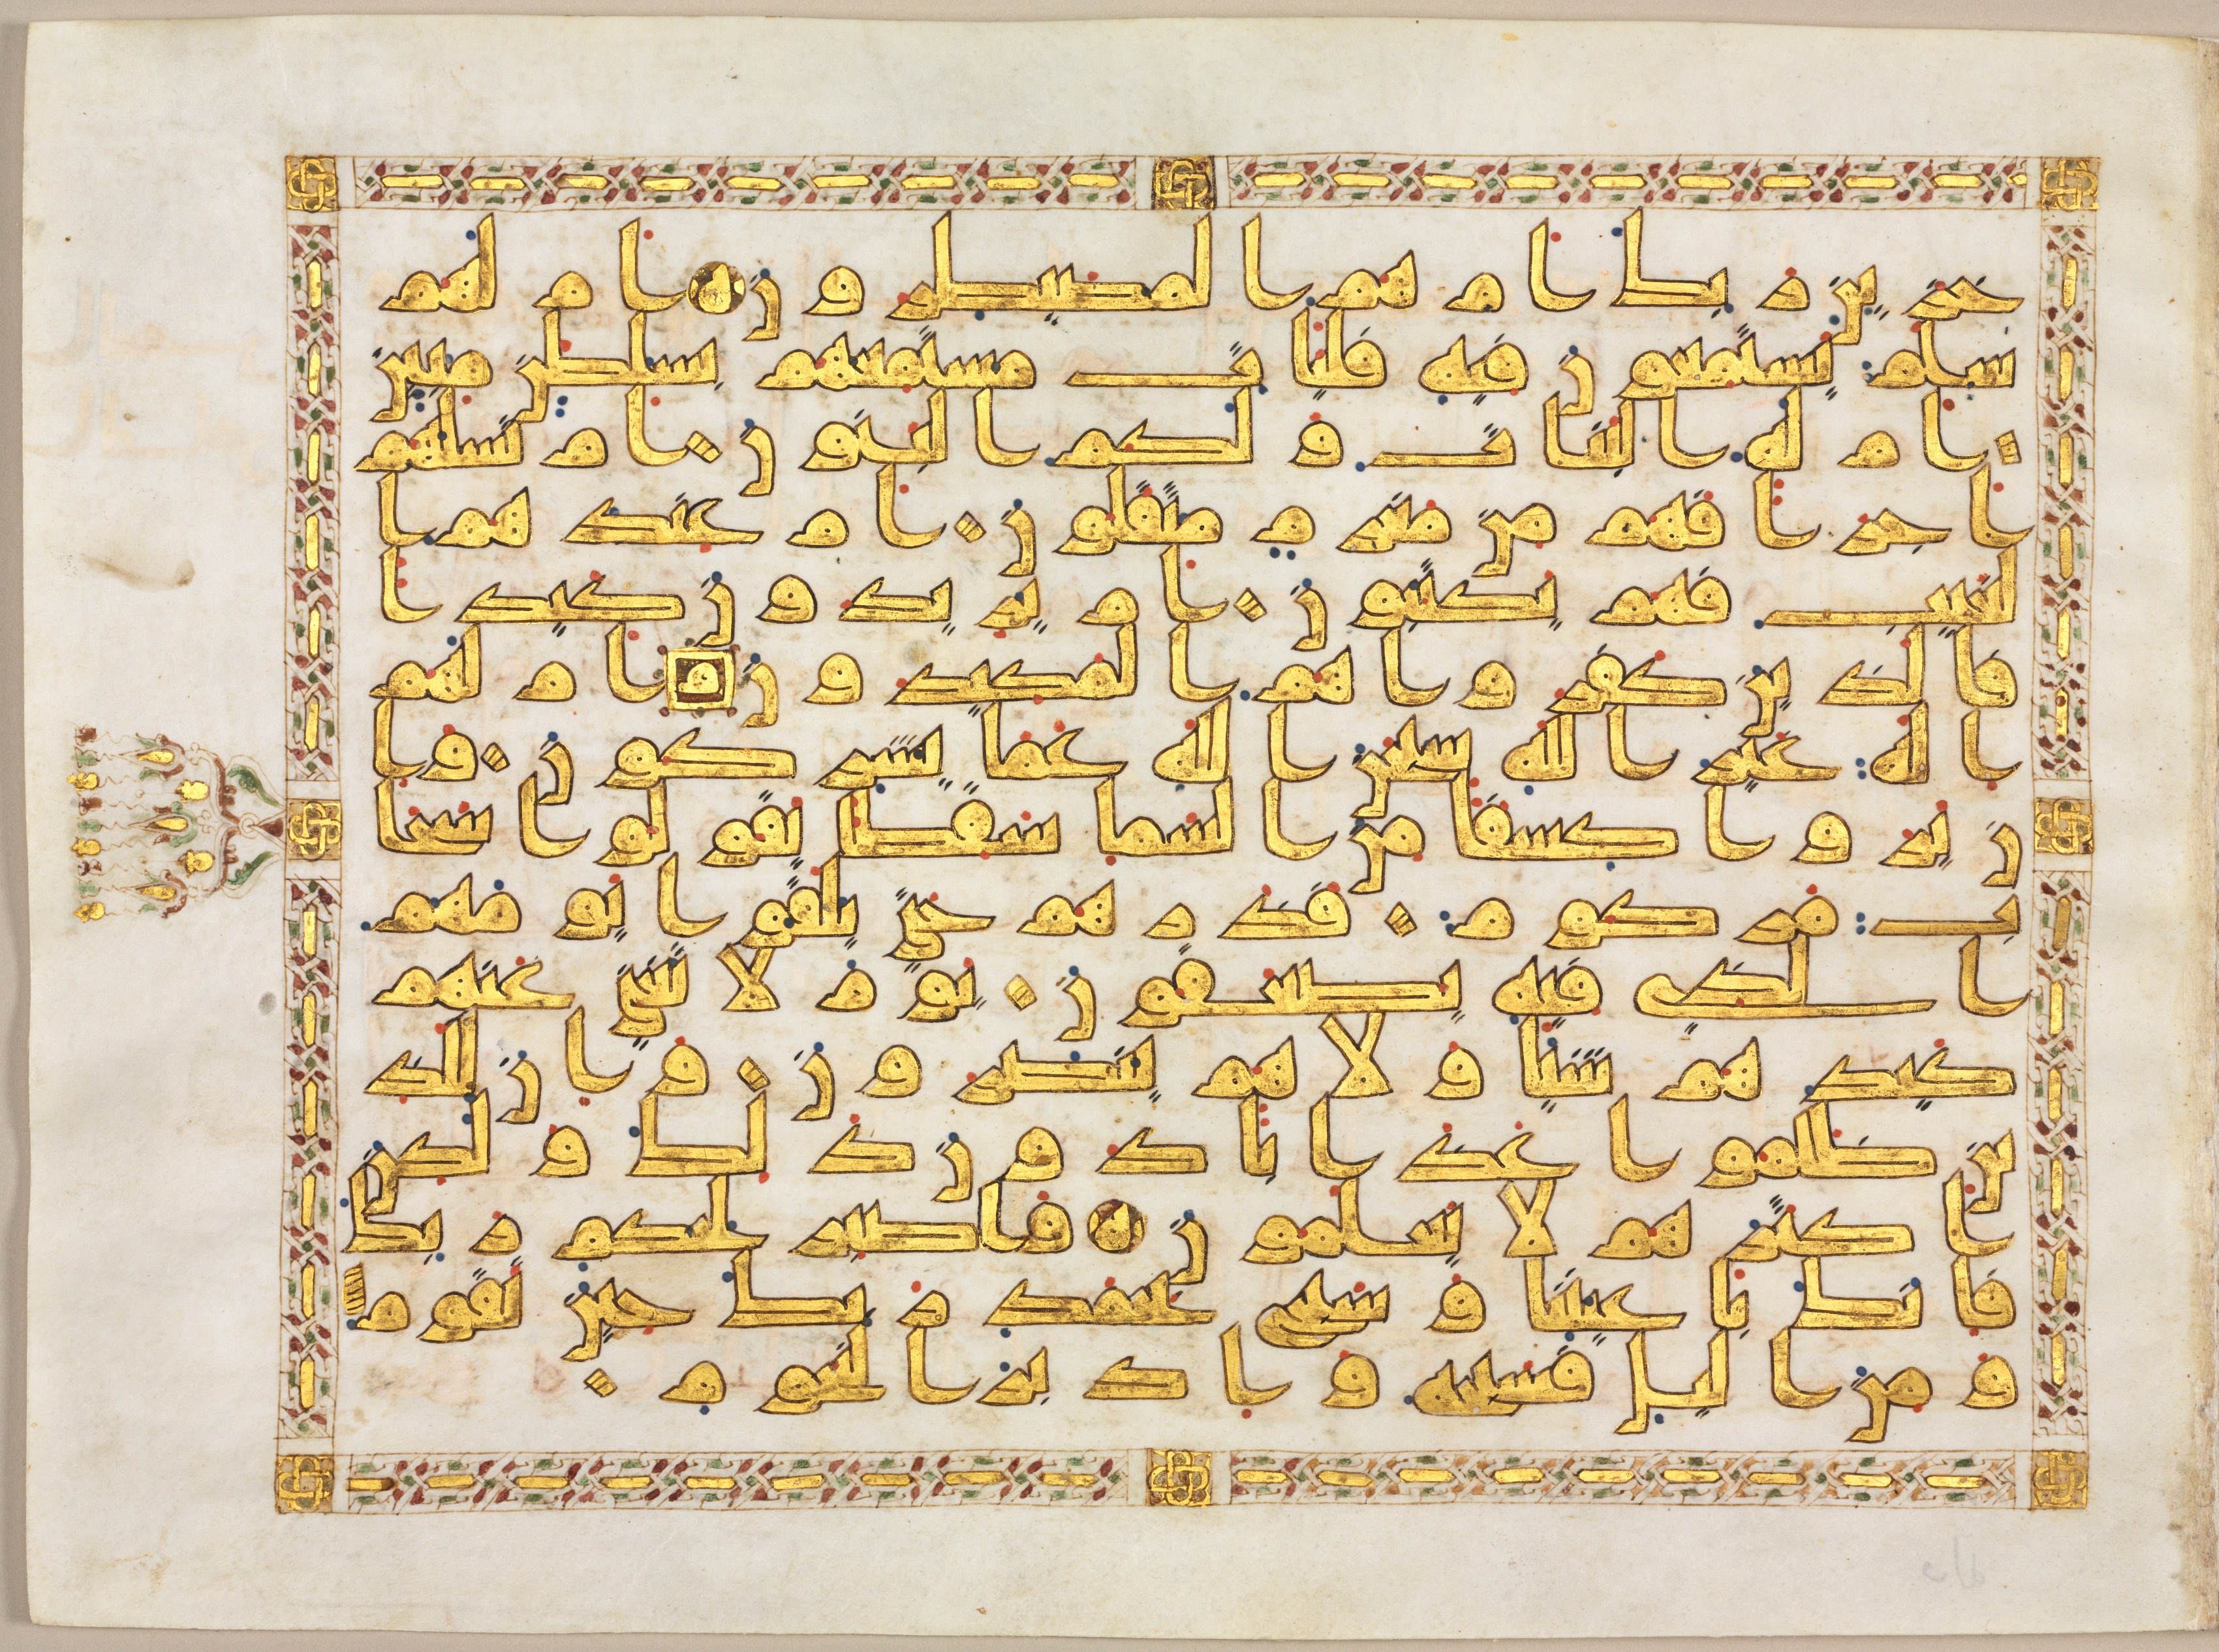 Folio from a Qur'an; right side of bifolio